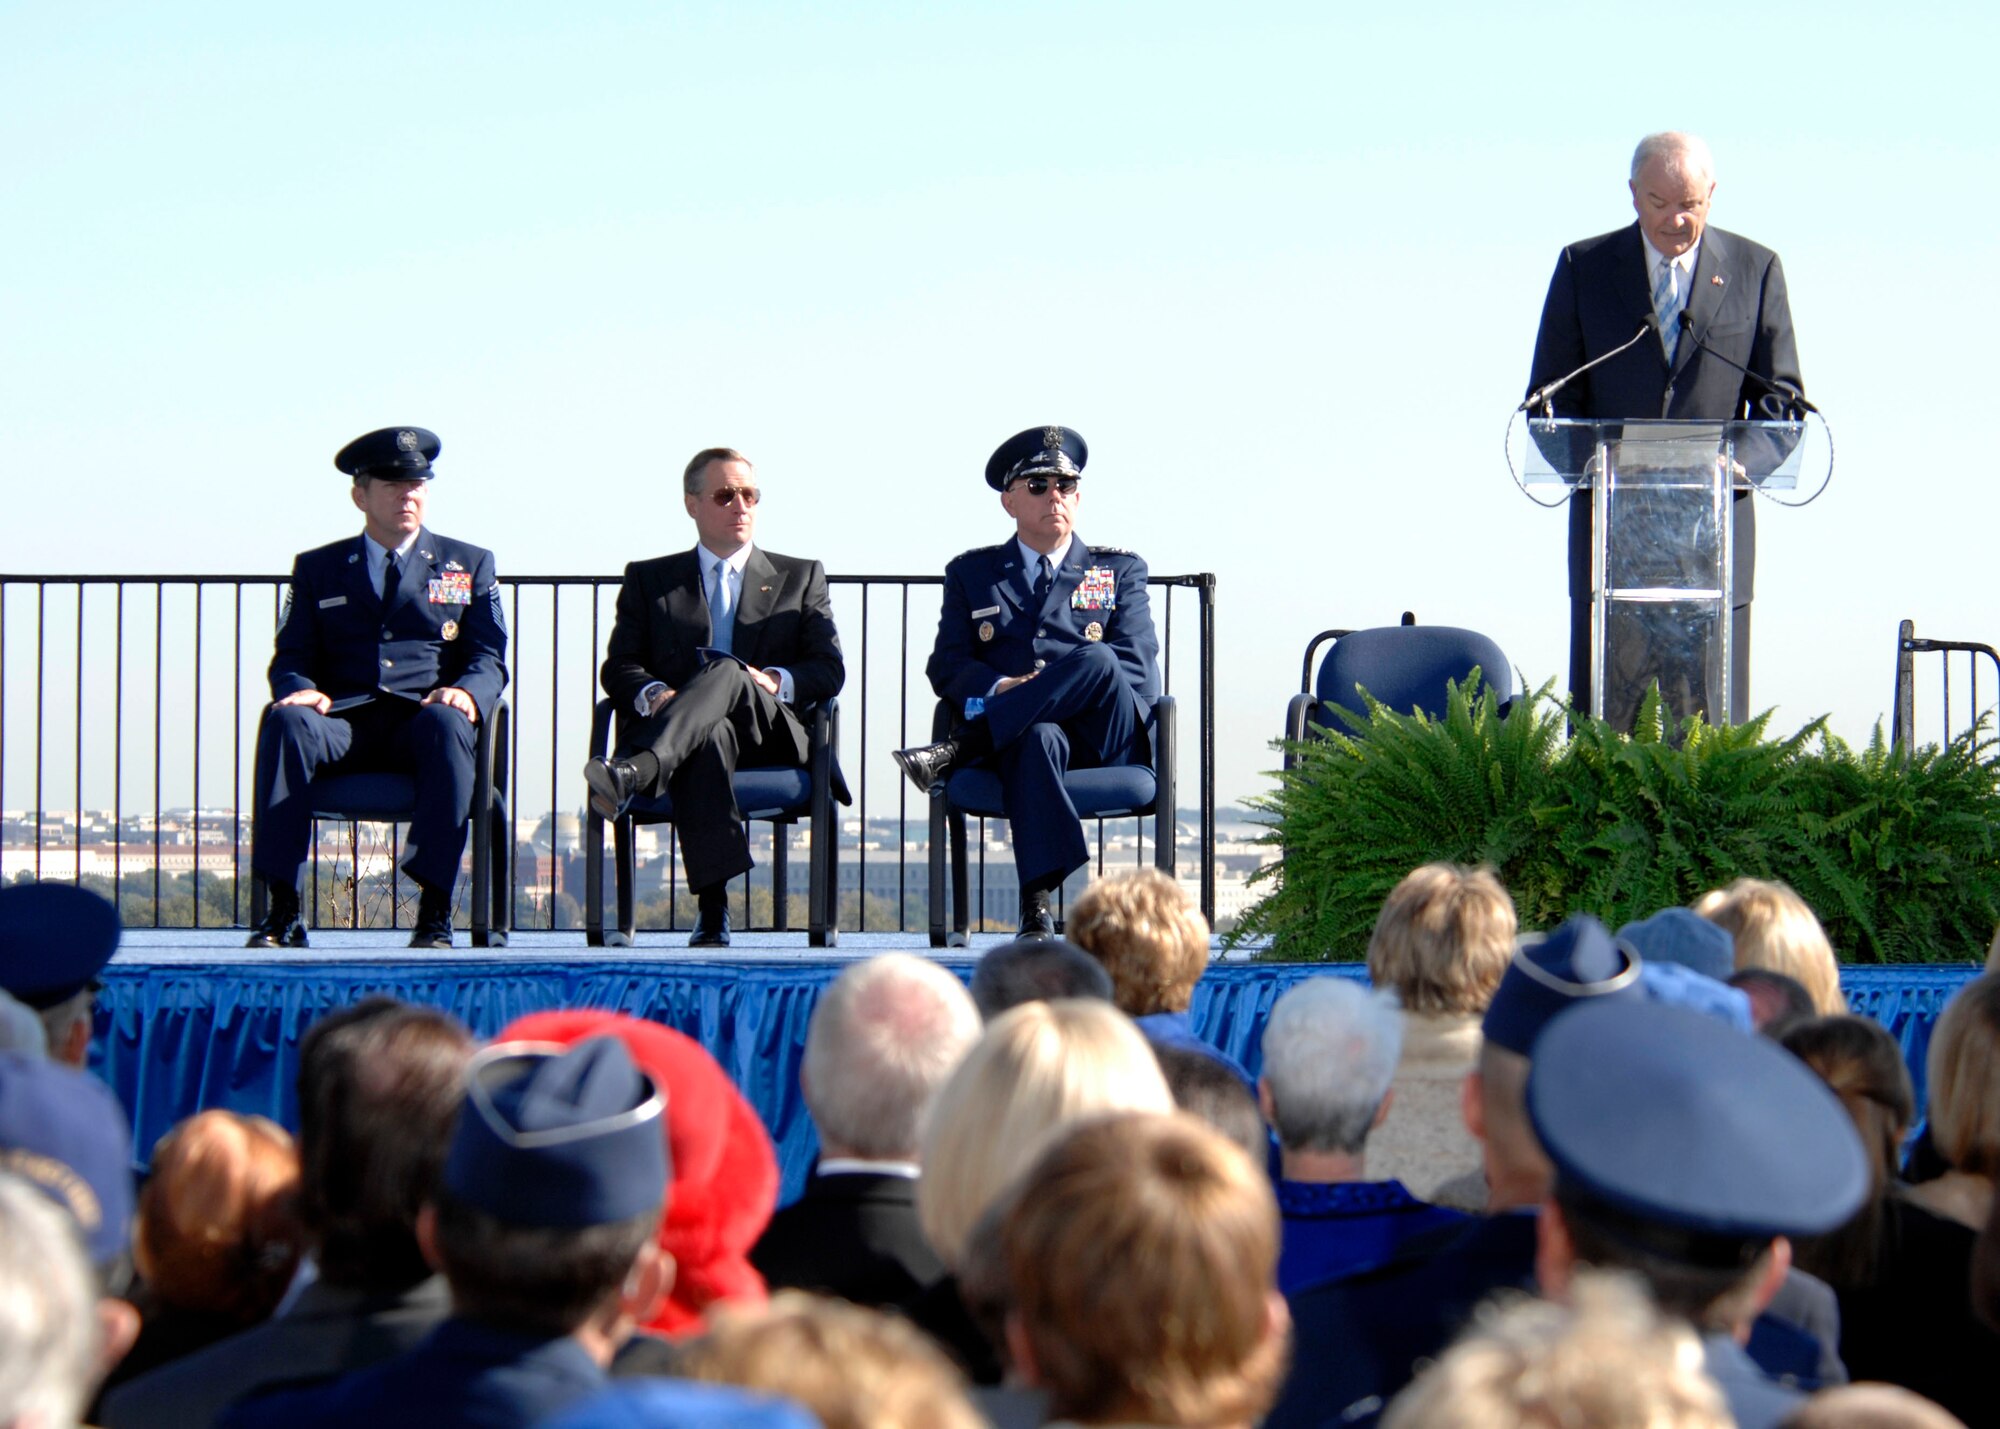 Hundreds gathered at the base of the new Air Force Memorial  as Secretary of the Air Force Michael W. Wynne officially closed the Air Force Memorial commemoration with a wreath laying ceremony in Arlington, Va., Oct. 15, 2006. Looking on are (from left) Chief Master Sgt. of the Air Force Rodney J. McKinley, Air Force Memorial Foundation Chairman Ross Perot Jr., and Air Force Chief of Staff Gen. T. Michael Moseley.  (U.S. Air Force photo/Tech. Sgt. Cohen Young) 